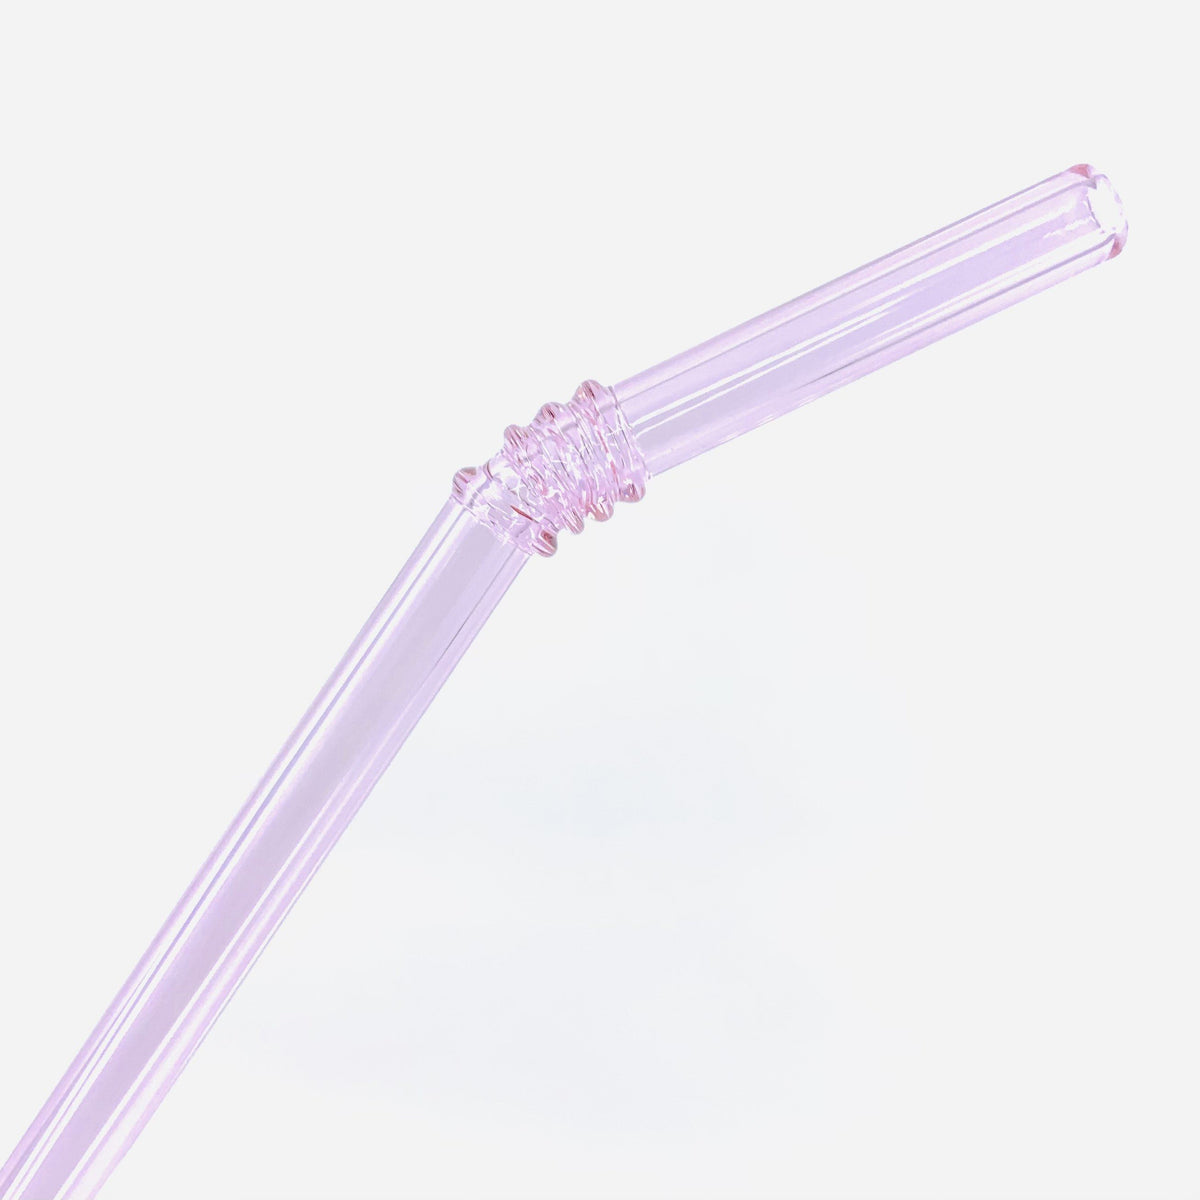 Glass Straws in Sapphire Pink/ Set of Four Reusable Drinking Straws / Pyrex  / Eco Friendly / Smoothie Straw / Glass Straw 